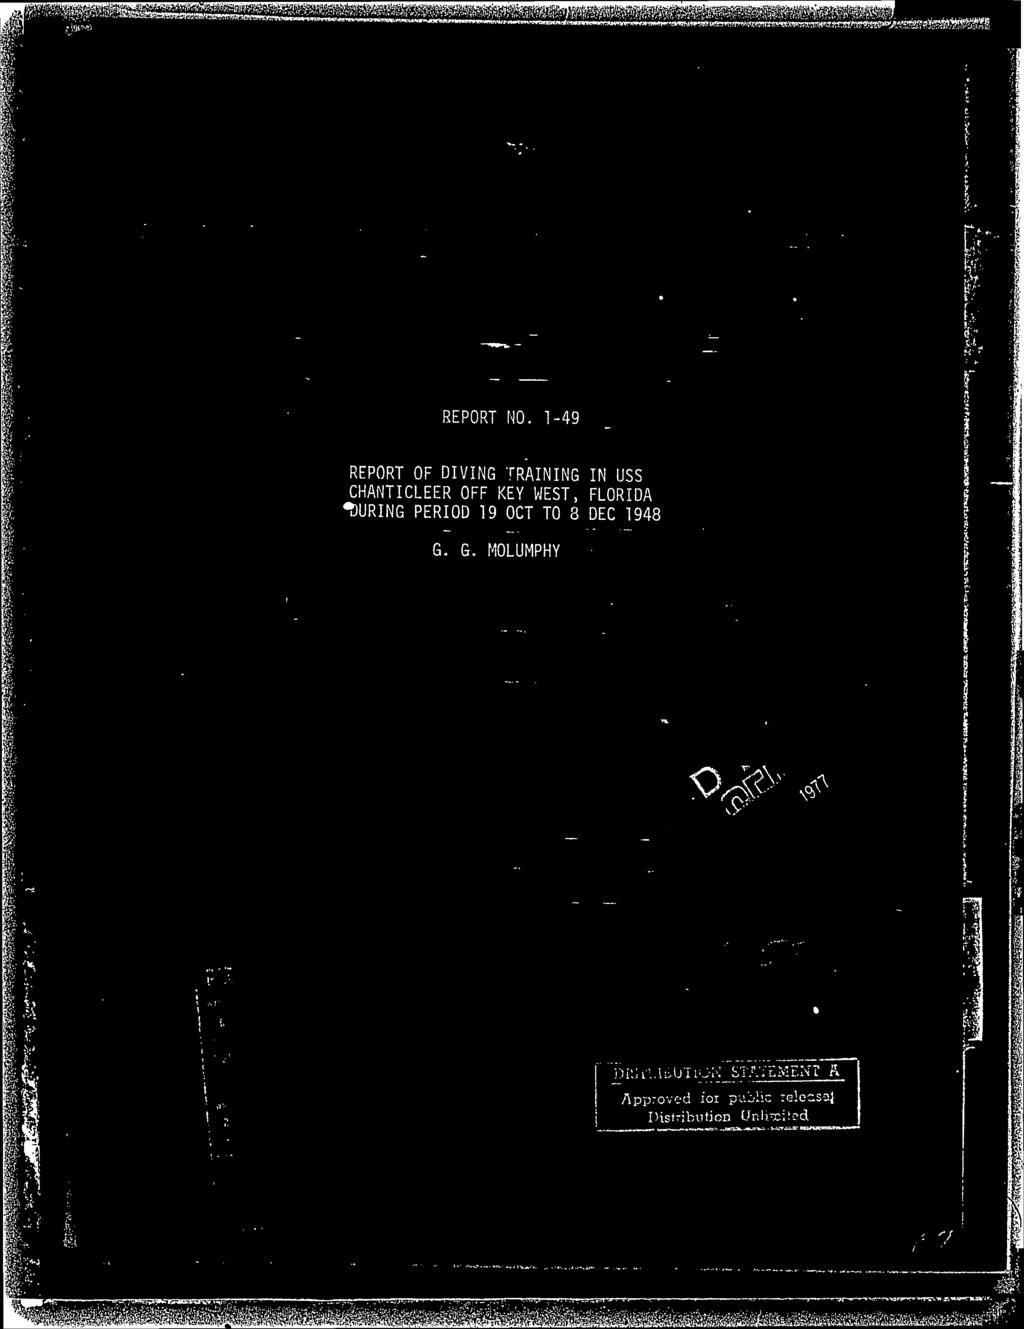 1-49 REPORT OF DVNG TRANNG N USS CHANTCLEER OFF KEY WEST, FLORDA TURNG PEROD 19 OCT TO 3 DEC 1948 G.